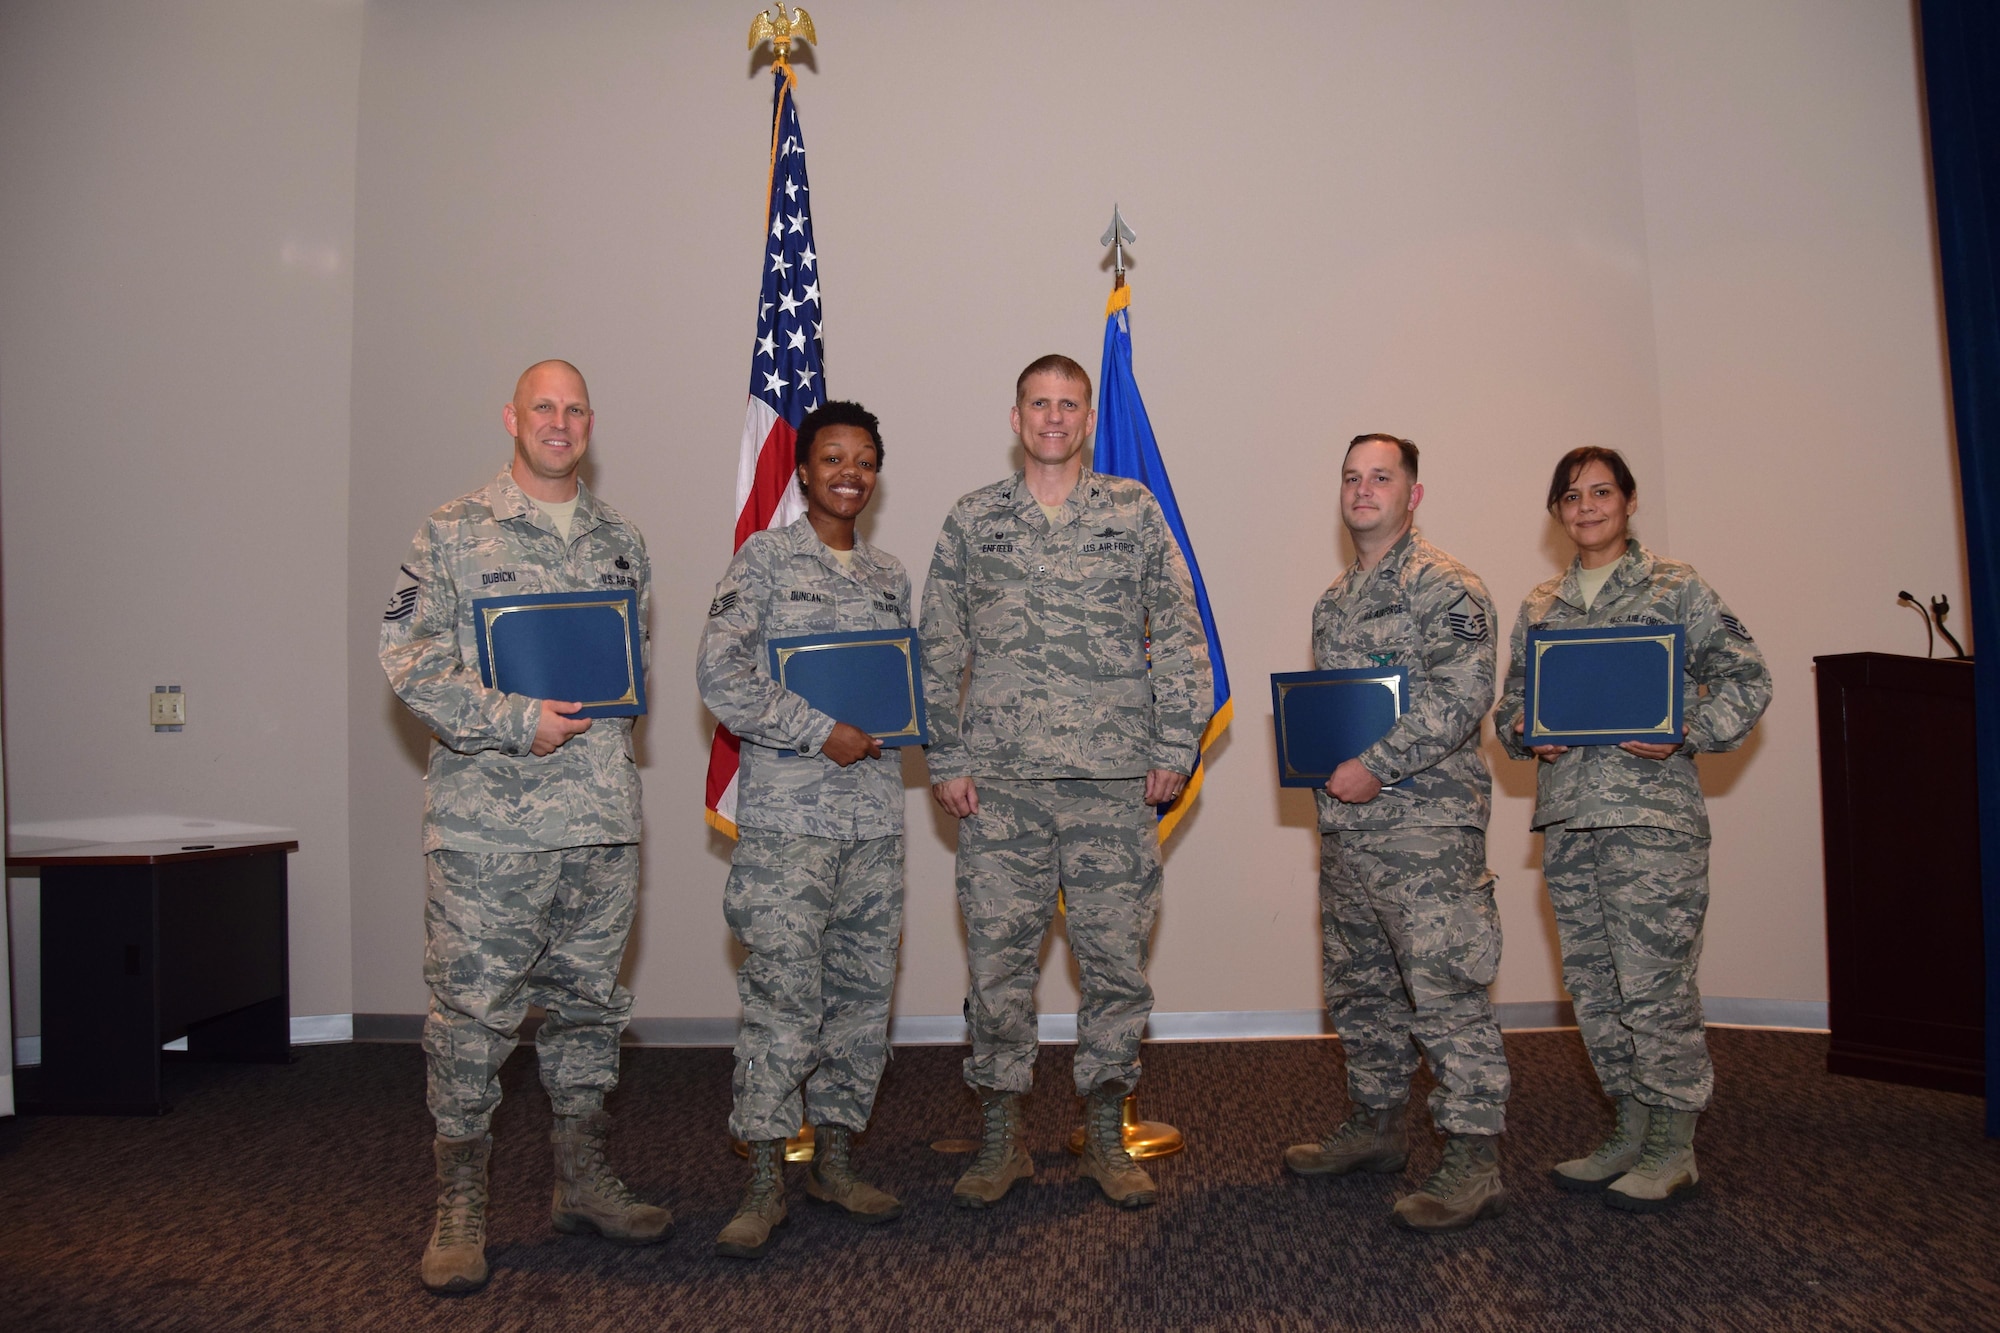 Col. David Enfield, center, 433rd Mission Support Group commander, congratulates, from left to right, Master Sgt. Jeremy Dubicki, Staff Sgt. Iliah Duncan, Master Sgt. Jonathan Boyd and Staff Sgt. Jennifer Martinez after they are presented their Community College of the Air Force degrees Nov. 5, 2016 in a ceremony held at the Inter American Air Forces Academy at Joint Base San Antonio-Lackland, Texas. (U.S. Air Force photo by Tech. Sgt. Carlos J. Treviño) 